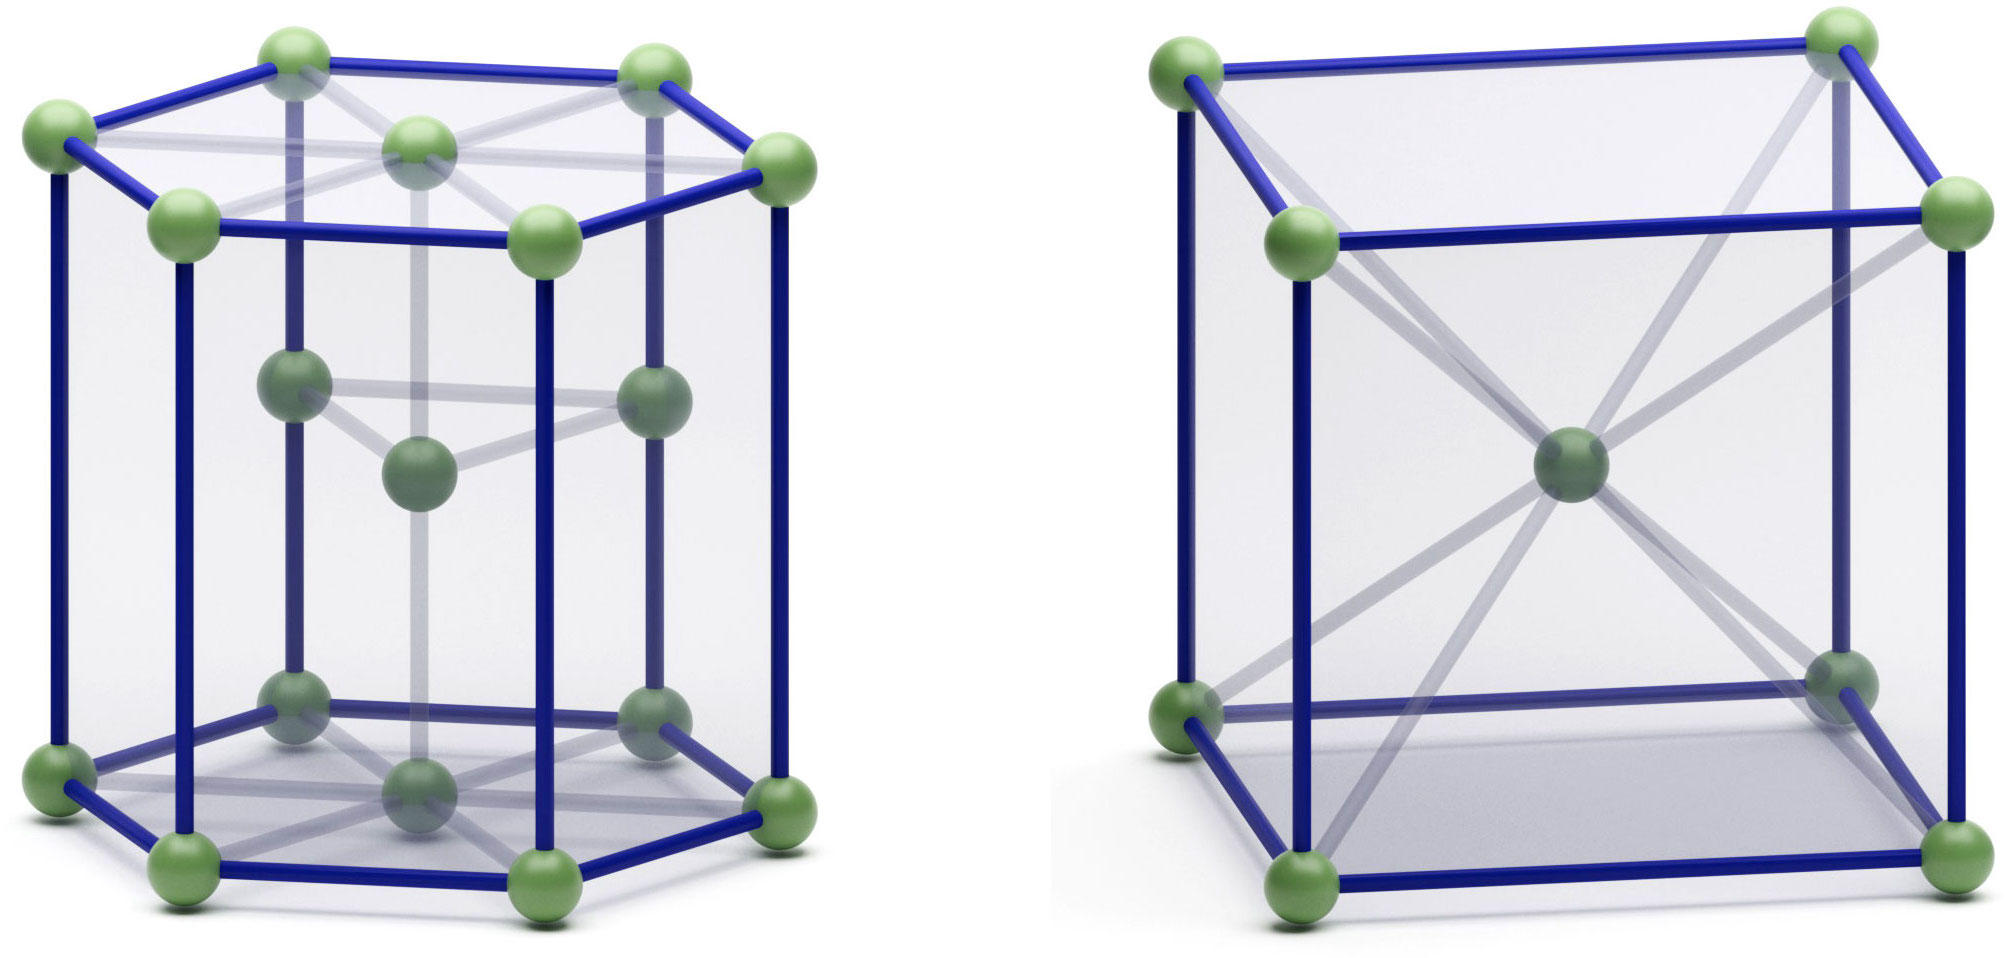 Diagram of two 3D polygon structures dotted with small circles